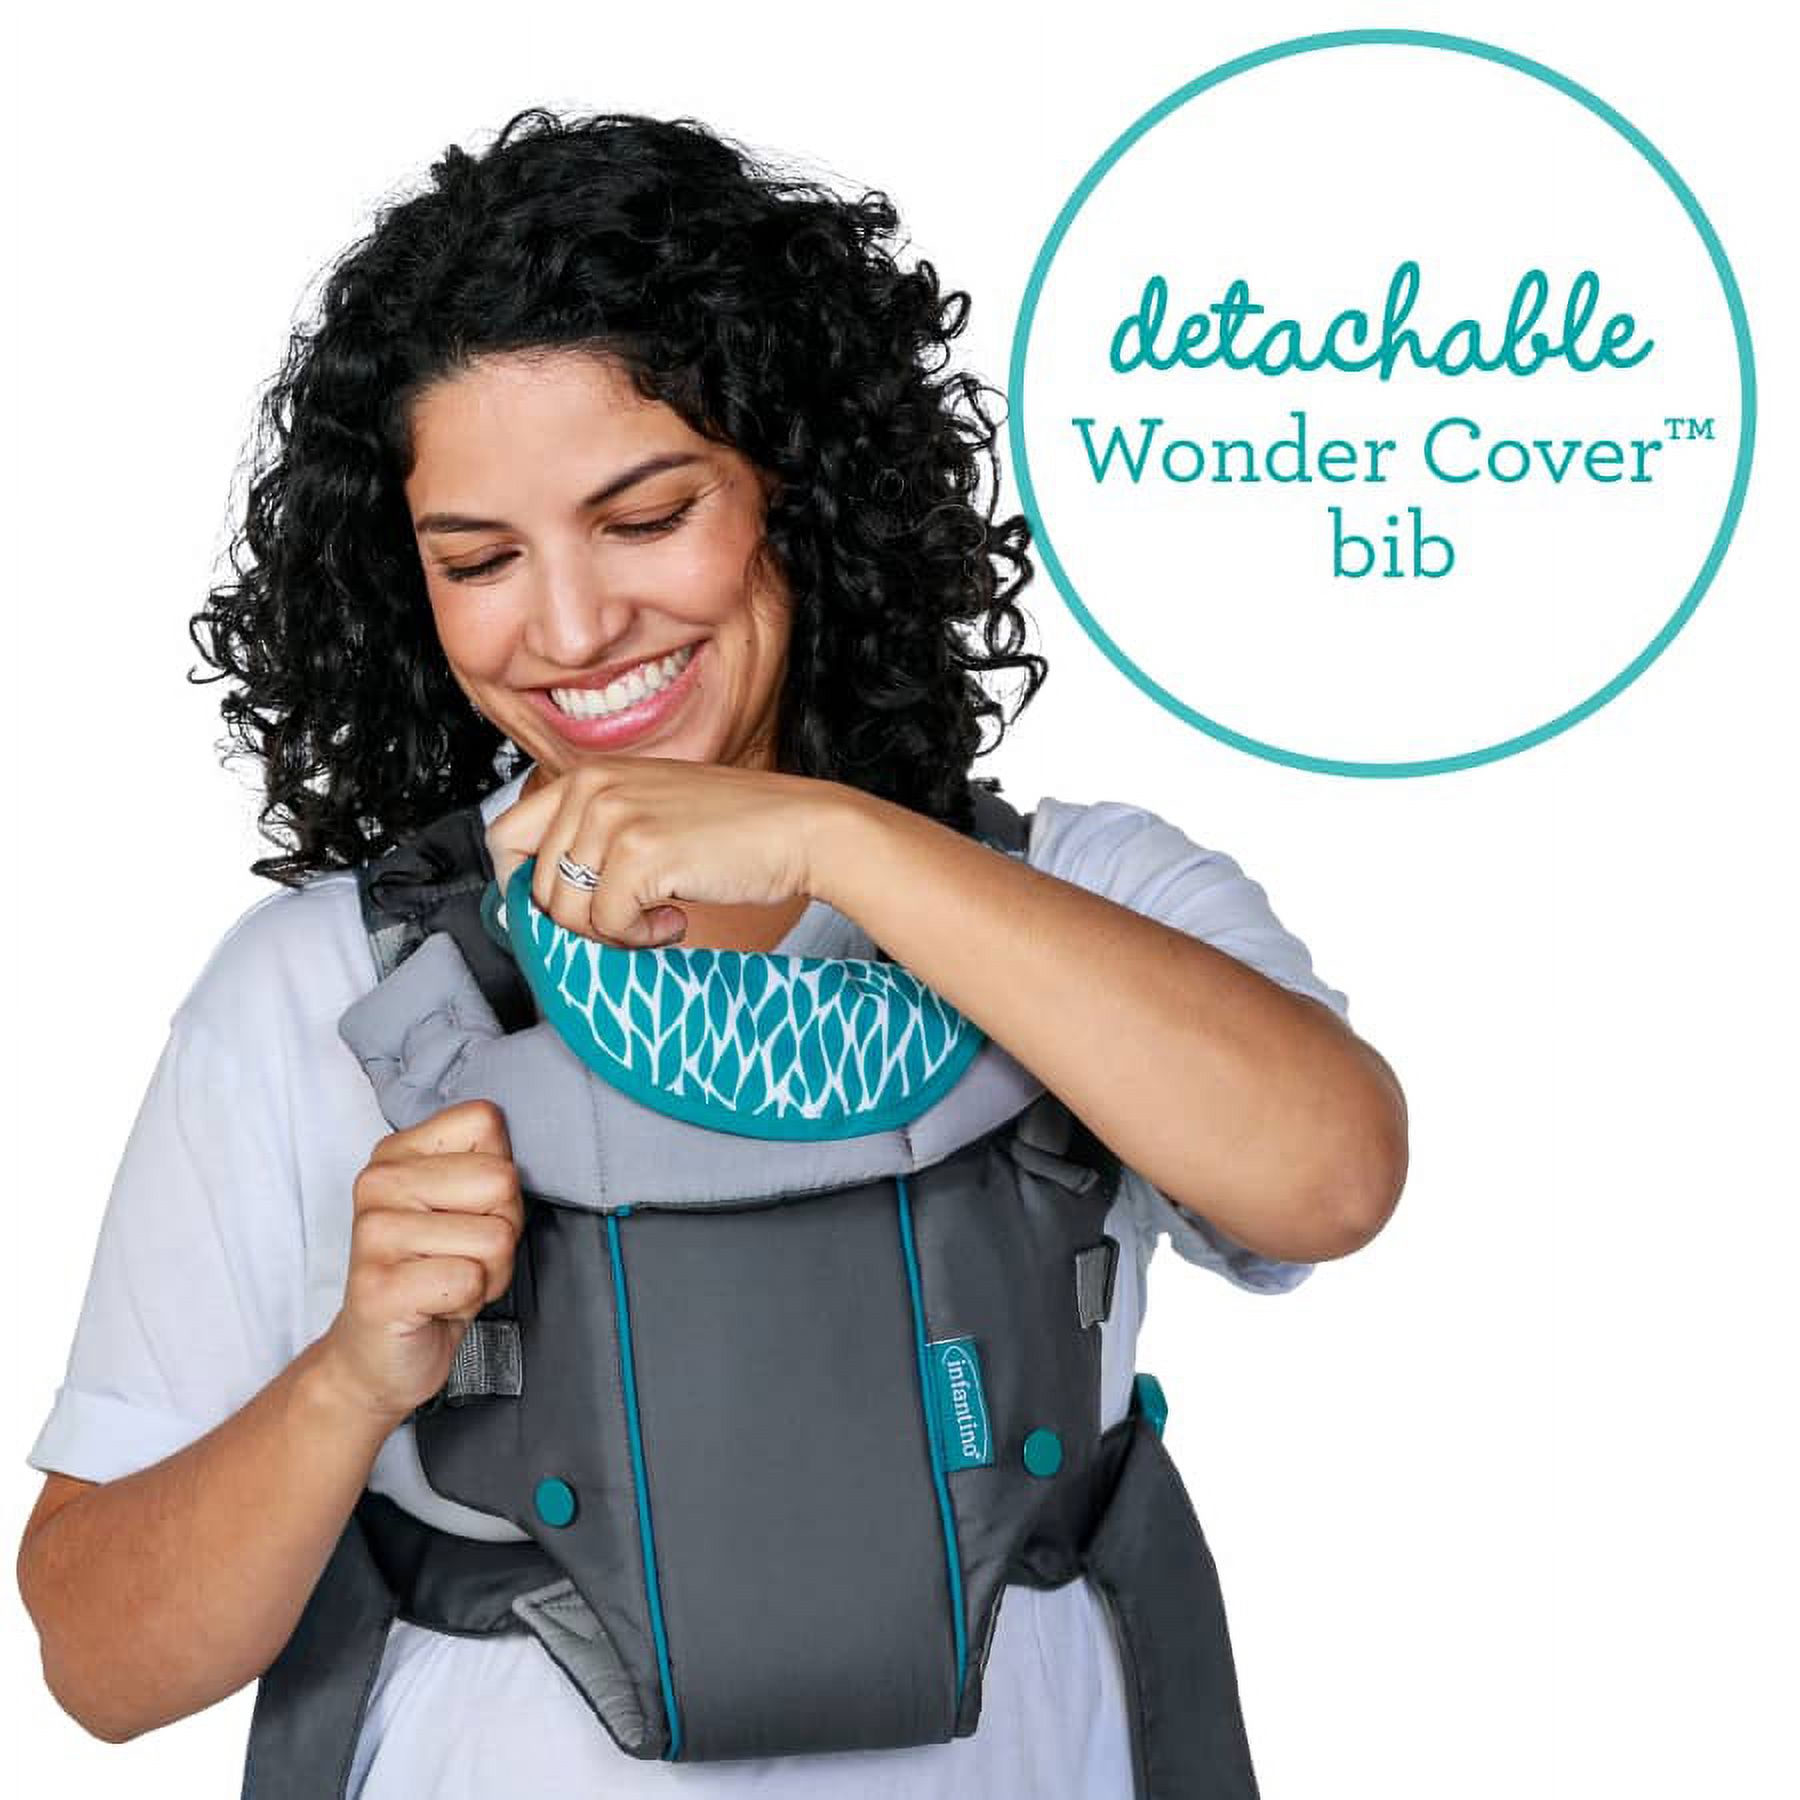 Infantino Swift Classic Baby Carrier with Wonder Cover Bib, 2-Position, 7-26lb, Gray - image 3 of 6